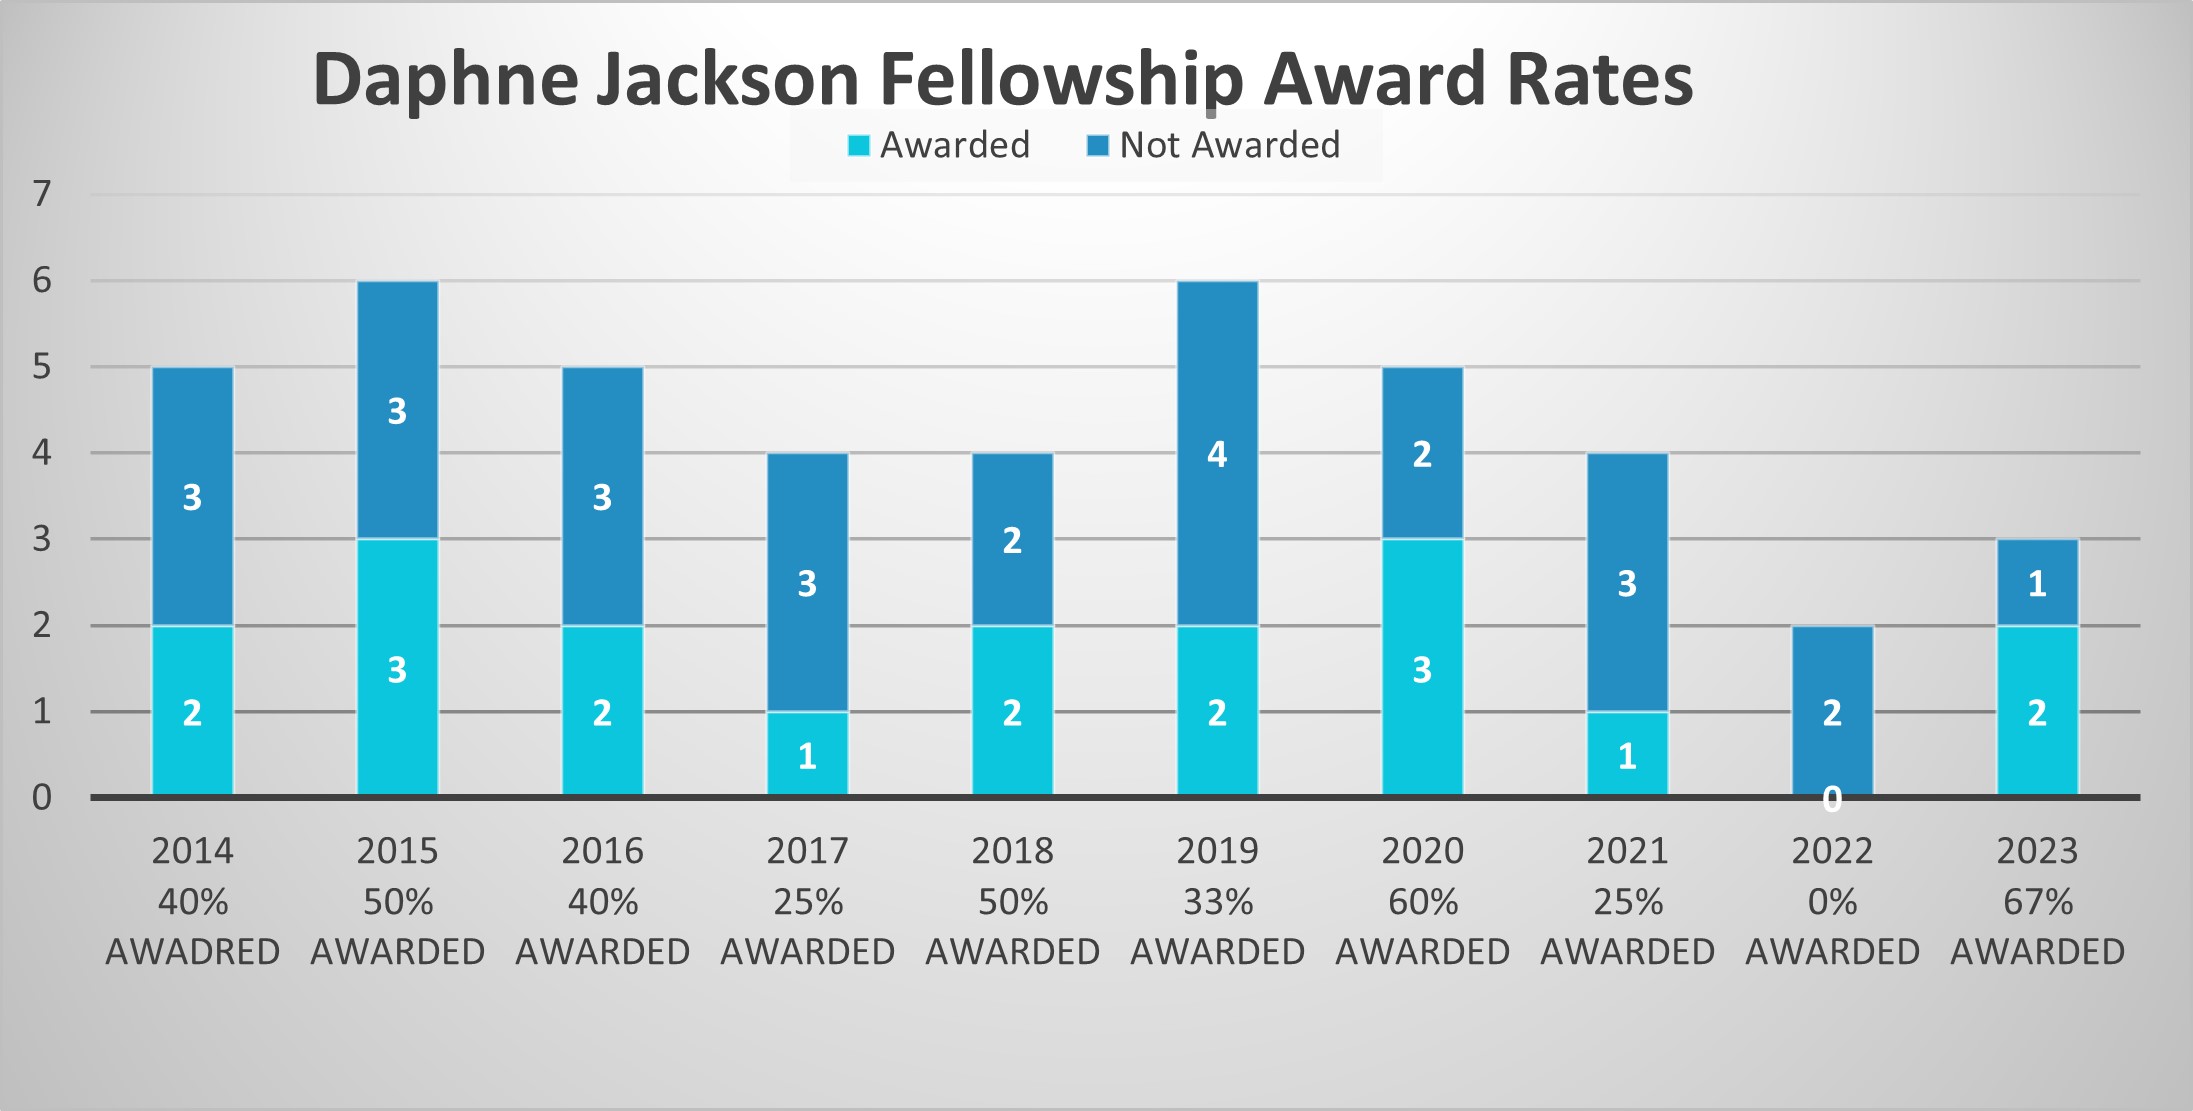 Chart showing how the application and award rates varied from 2014 to 2023 for Daphne Jackson Fellowships